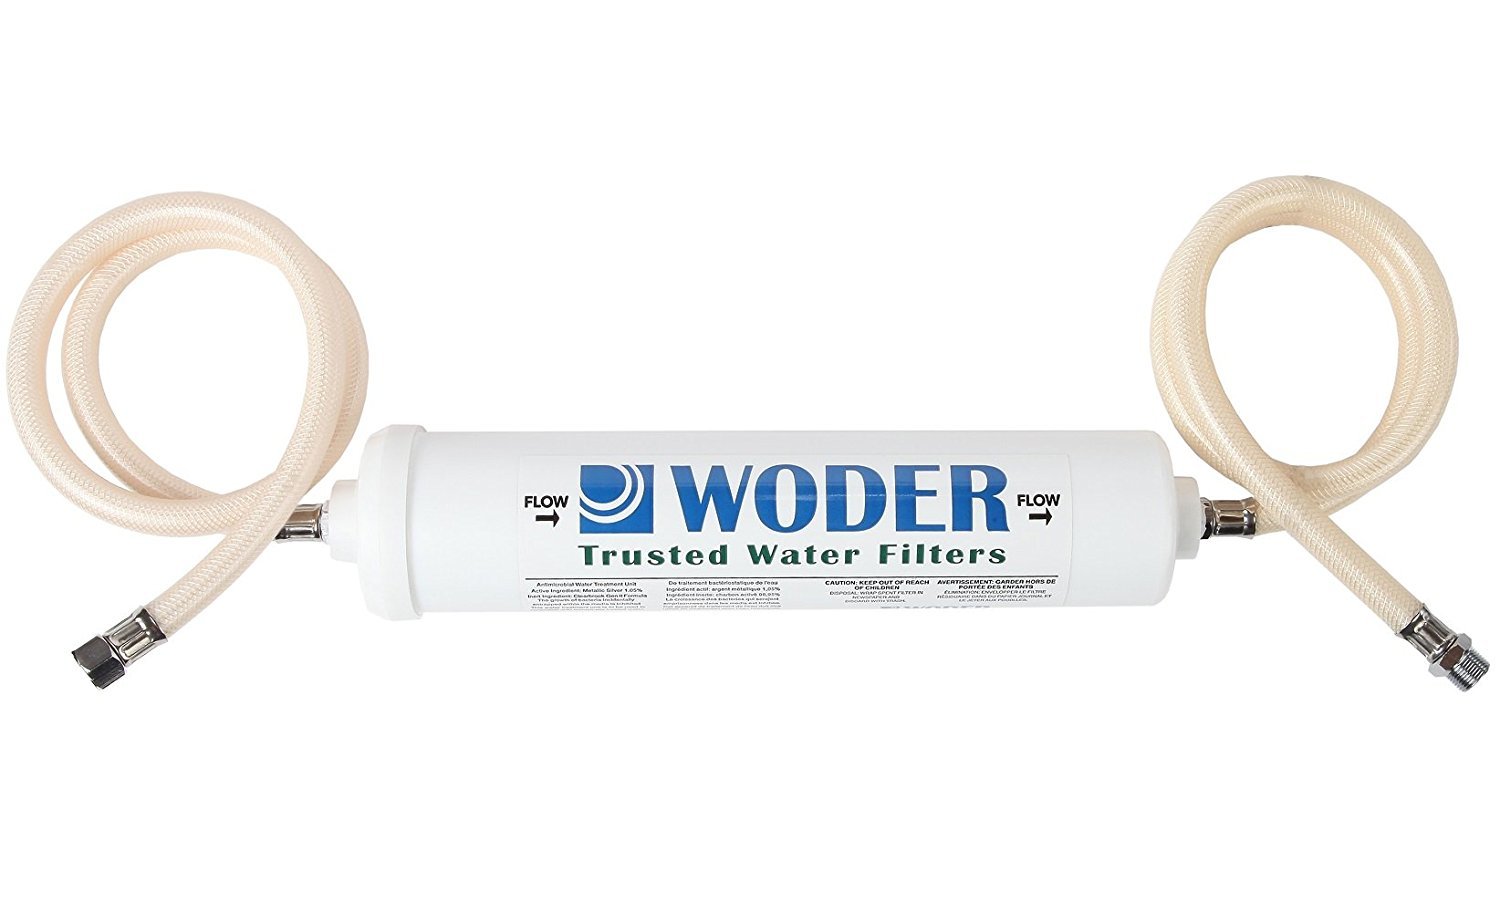 Woder WD-4K-ADV-DC Ultra High Capacity Under Sink Water Filter with Direct Connect Fittings - WQA Certified 4,000gal – Removes Chlorine, Lead, Chro...